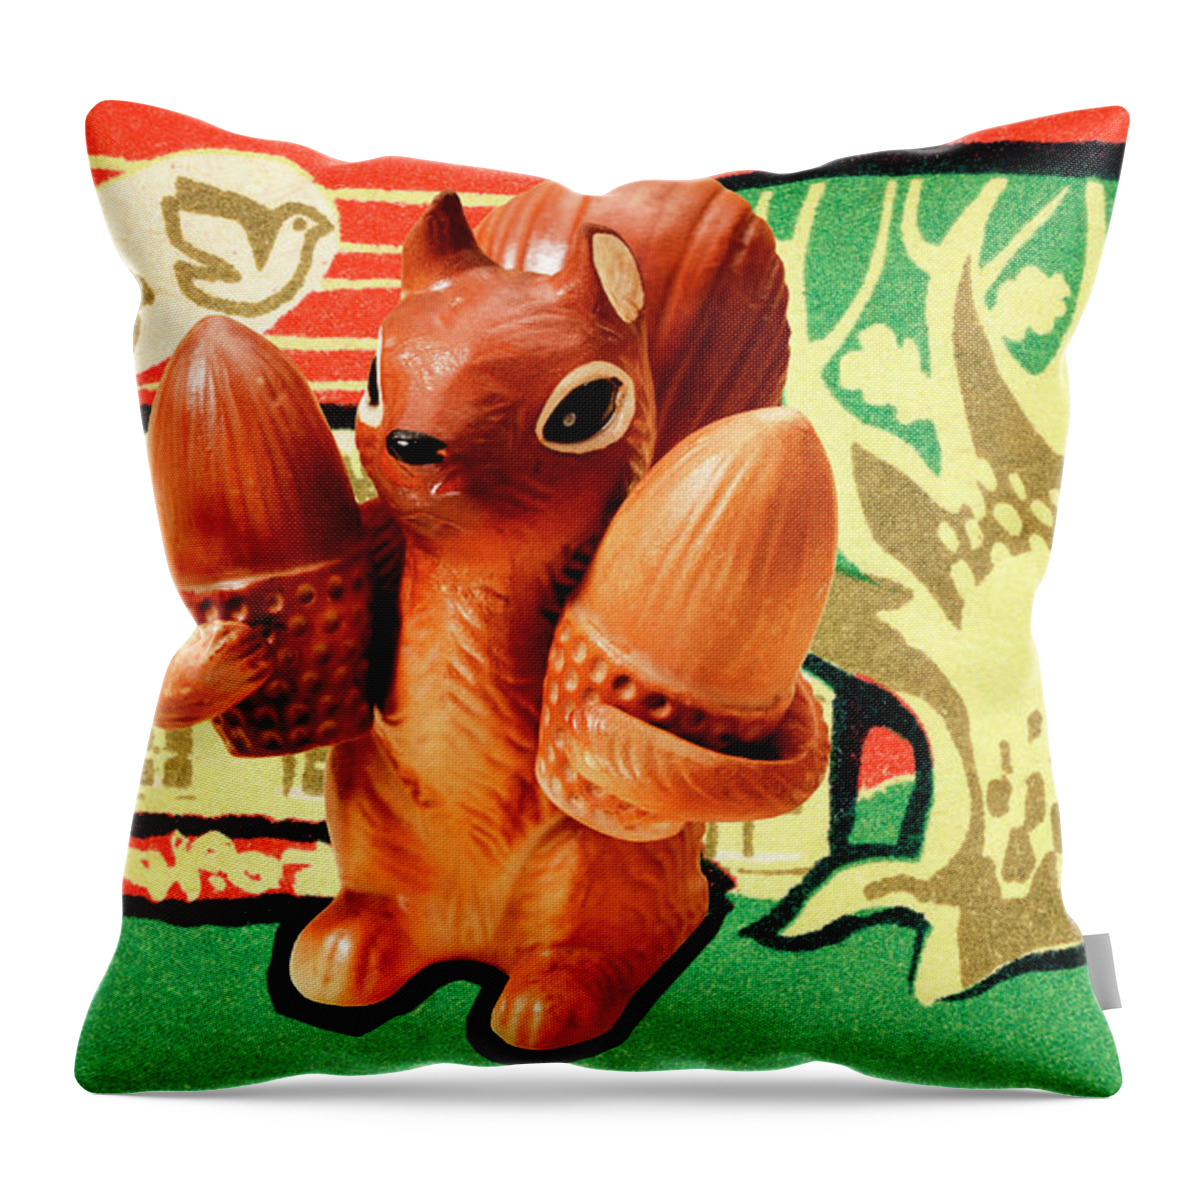 Acorn Throw Pillow featuring the drawing Squirrel Holding Acorns by CSA Images